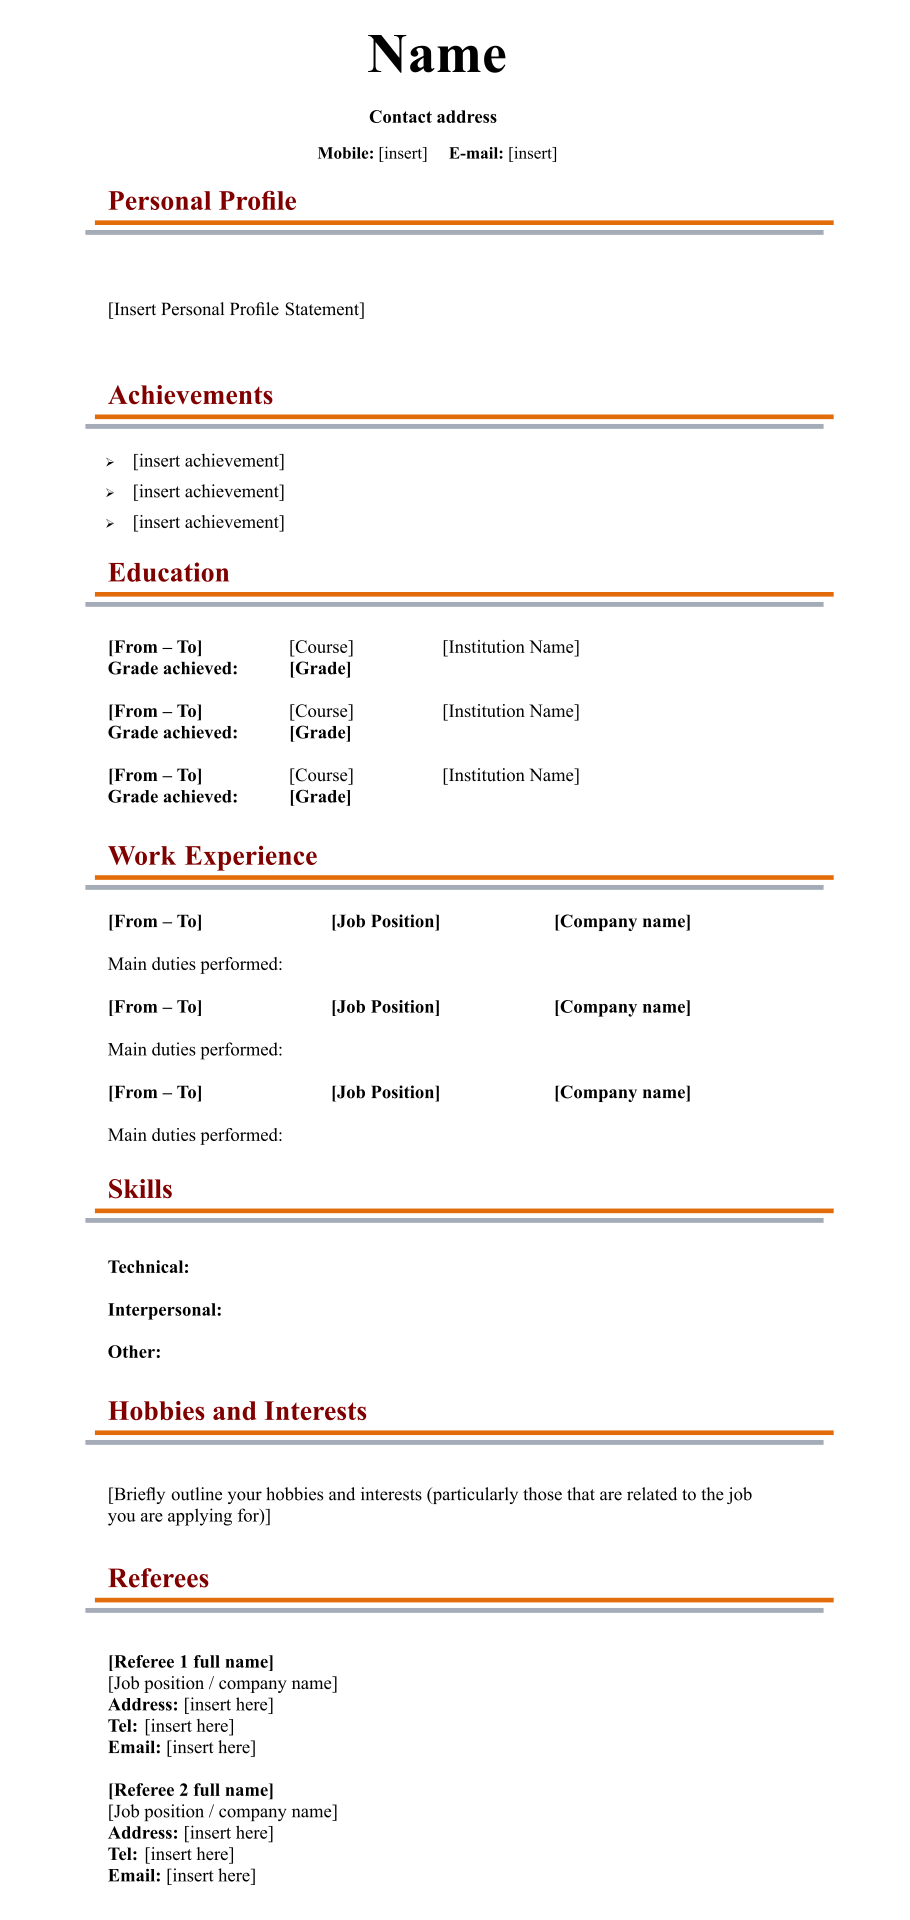 Blank Resume Template / Blank Resume To Fill Out Lewisburg District Umc